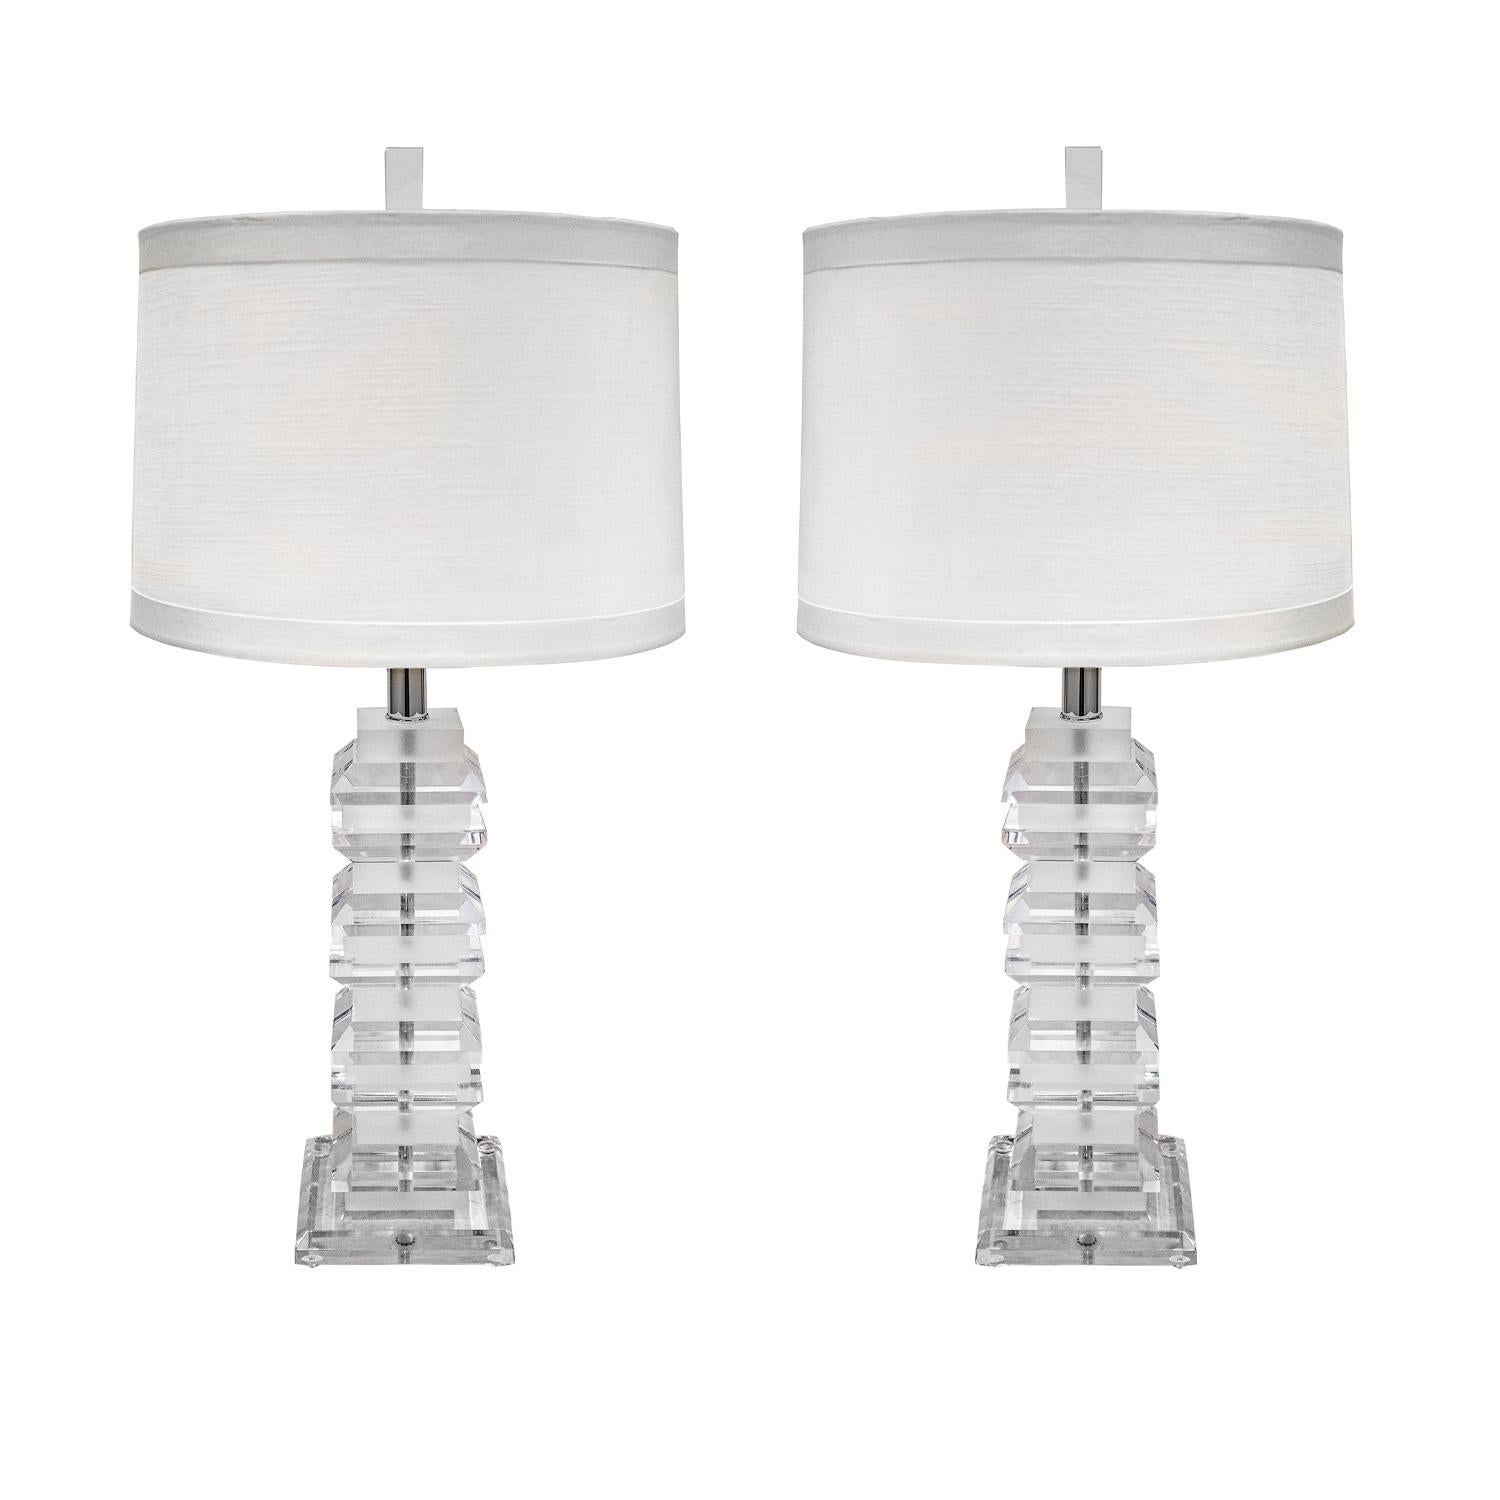 Pair of sculptural lucite table lamps with alternating frosted and clear pieces, American 1970's.  These lamps are very chic.

Dimensions of shades as shown:
Shade Diam: 14 inches
Shade H: 10 inches